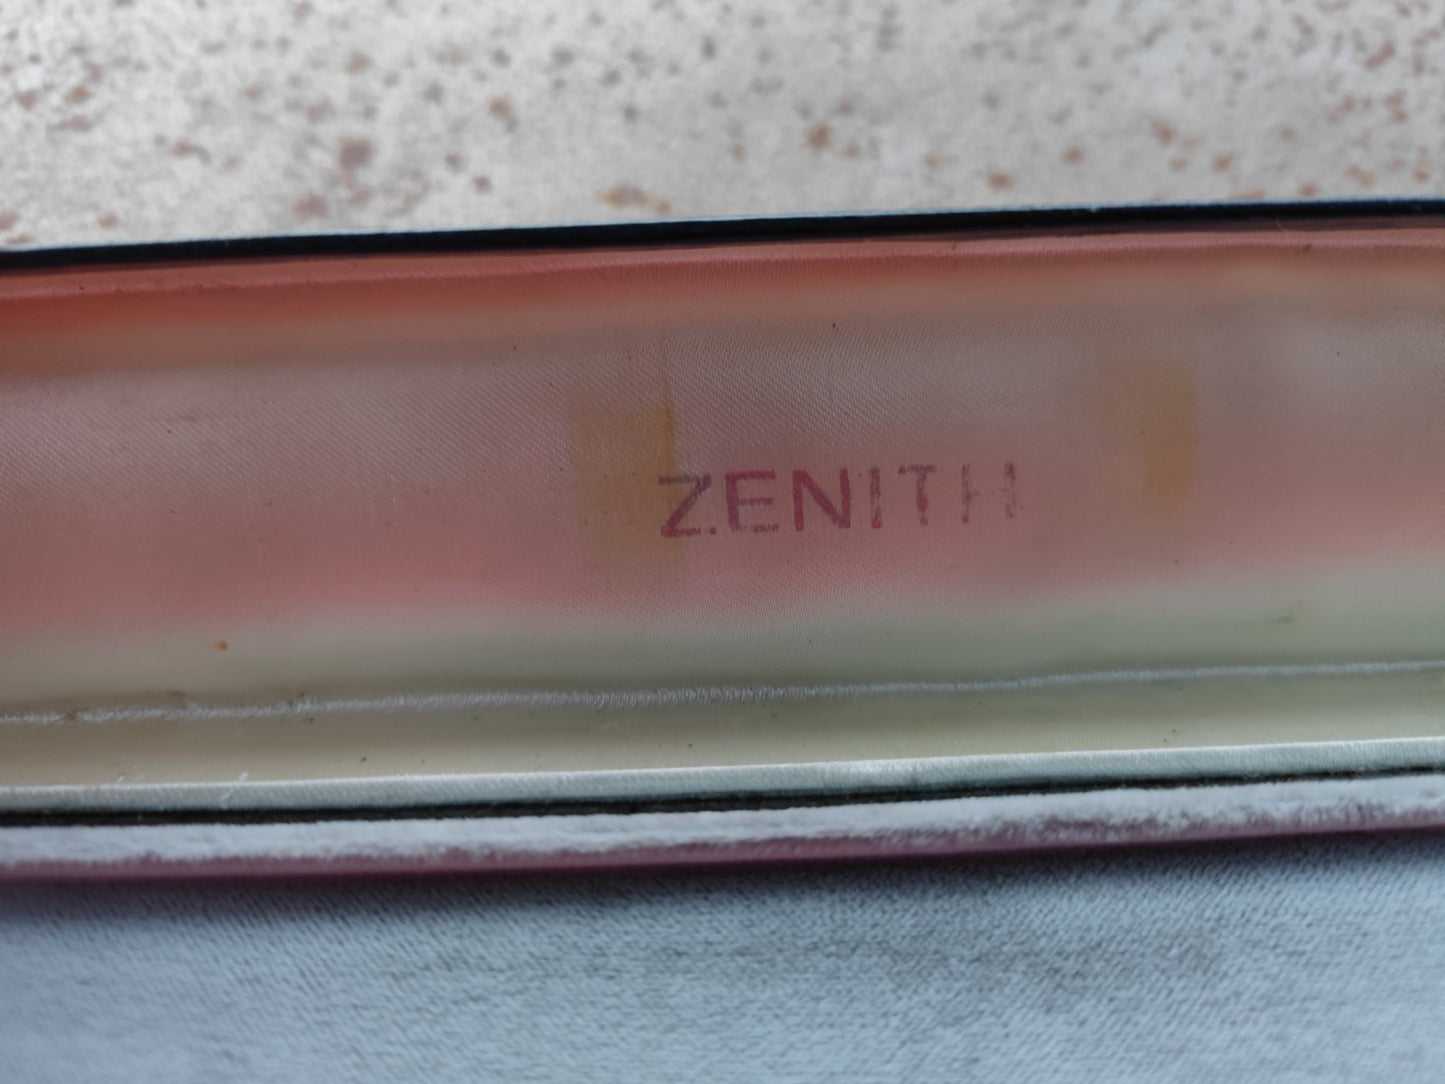 Vintage Zenith watch box for Mens models.